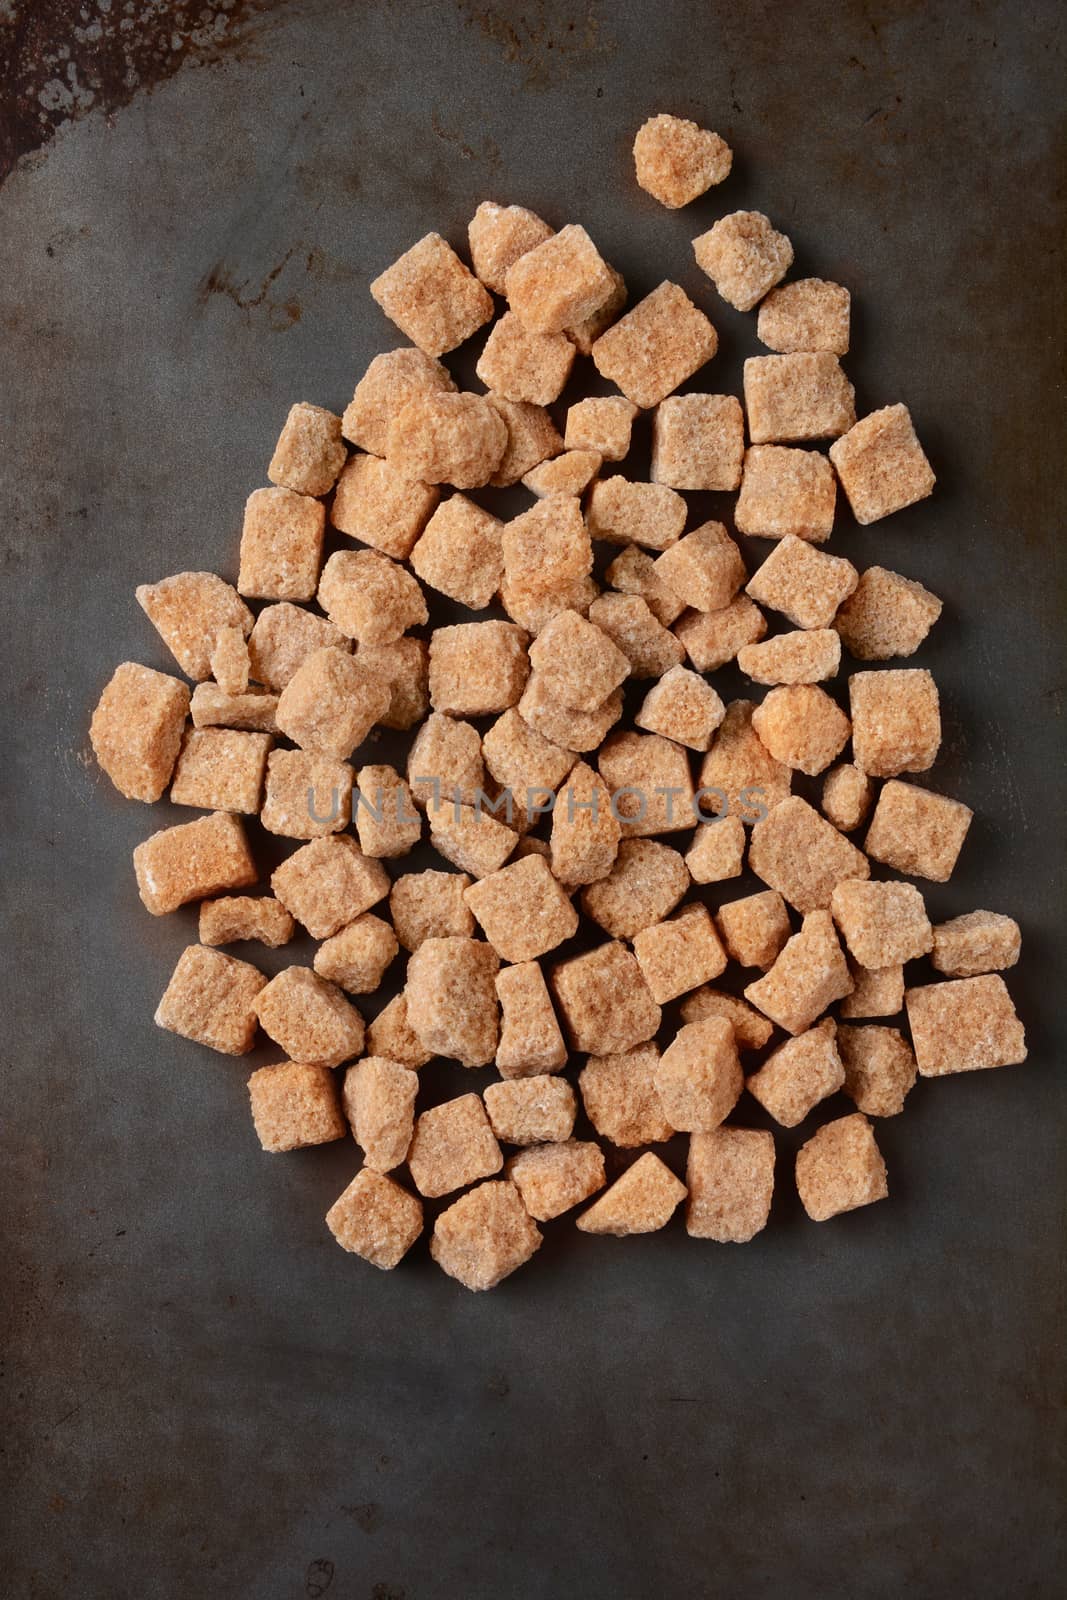 High angle view of a pile of brown natural sugar cubes on a used metal baking sheet. Vertical format.